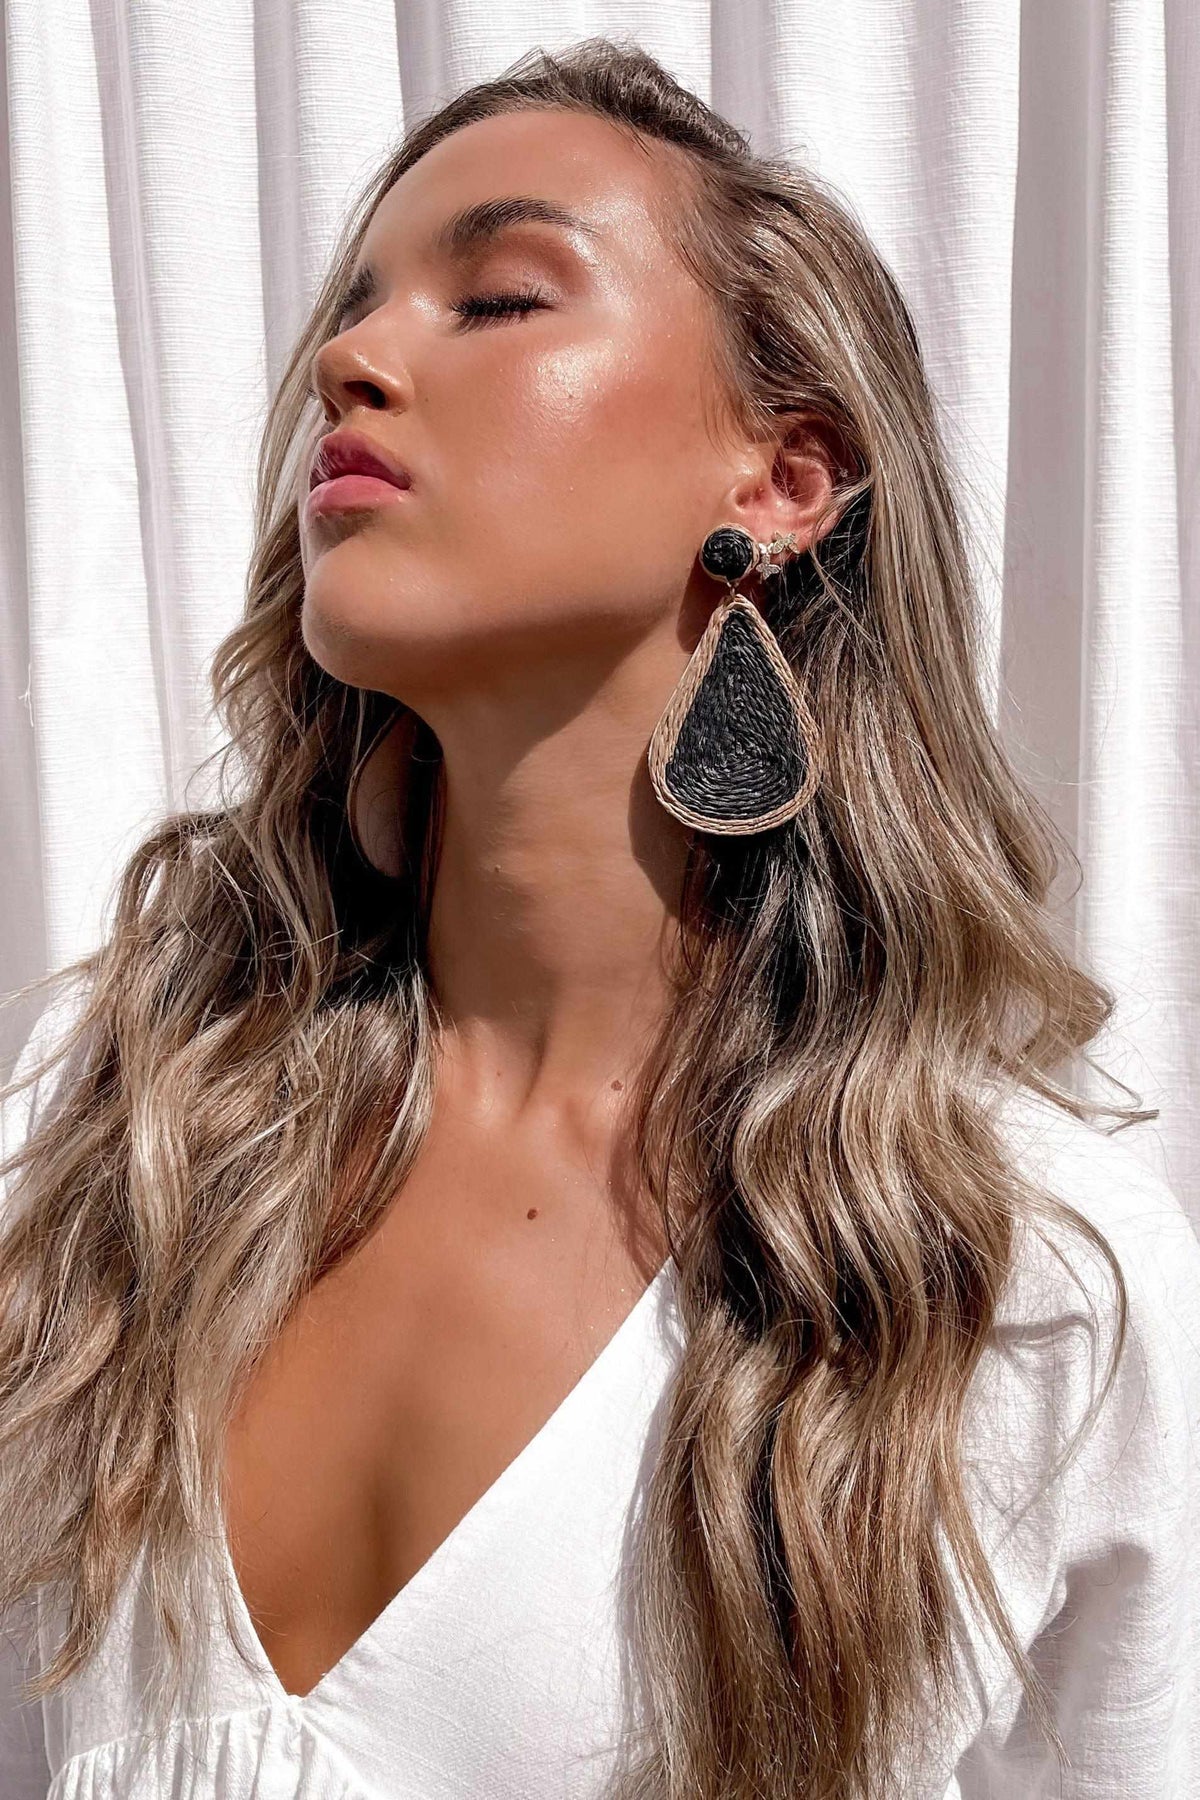 Forever Earrings, ACCESSORIES, EARRINGS, JEWELLERY, NEW ARRIVALS, Our New Forever Earrings Is Now Only $31.00 Exclusive At Mishkah, We Have The Latest Fashion Accessories @ Mishkah Online Fashion Boutique Our New Forever Earrings is now only $31.00-MISHKAH